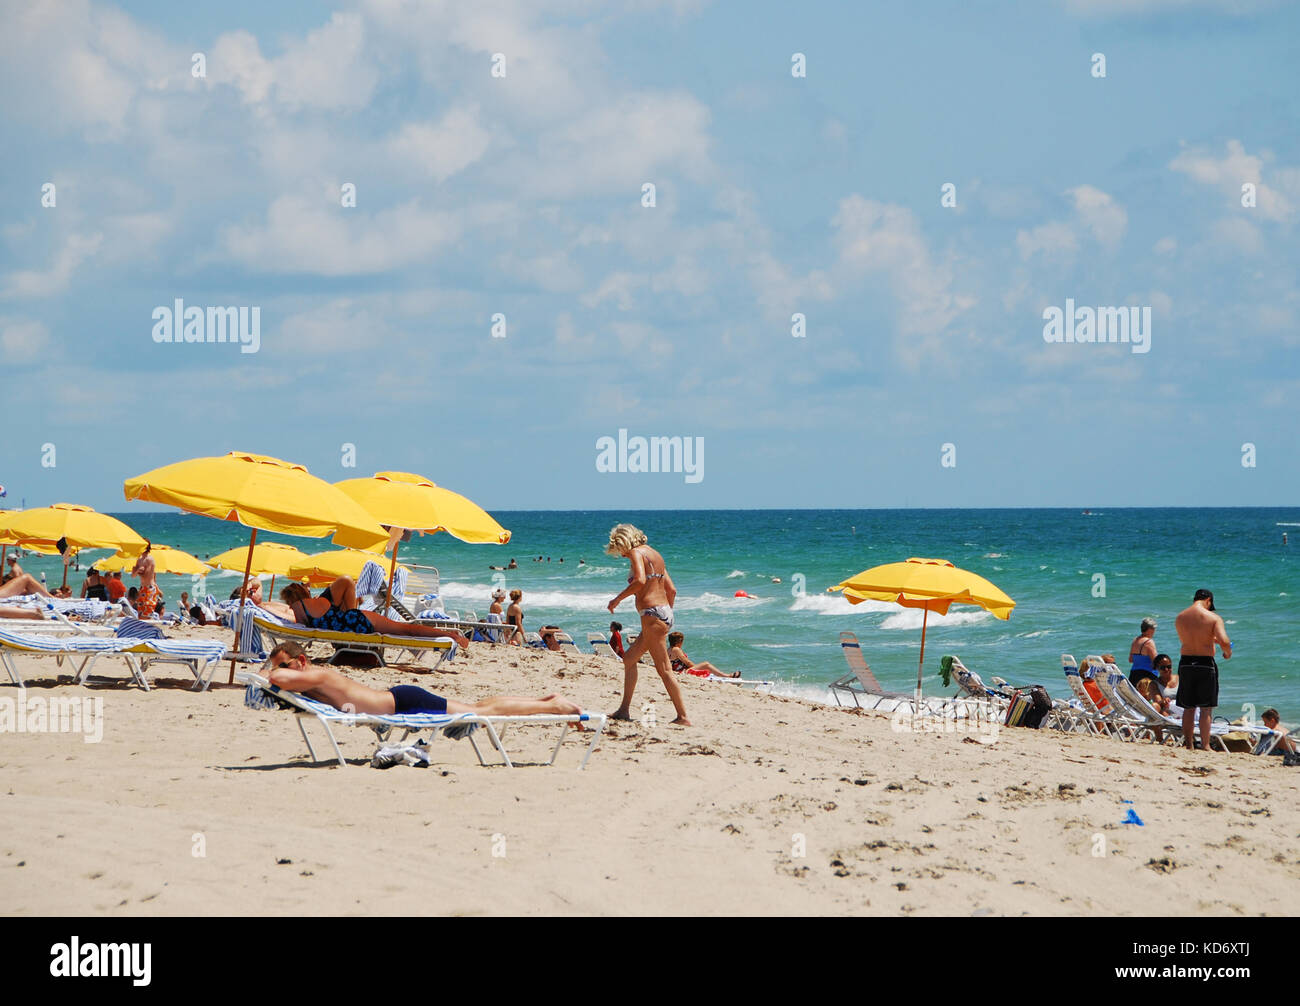 Fort Lauderdale, USA - June 9, 2007: Busy day on the beach in Fort Lauderdale, Florida. Tourists visit Florida in high numbers during the high season Stock Photo